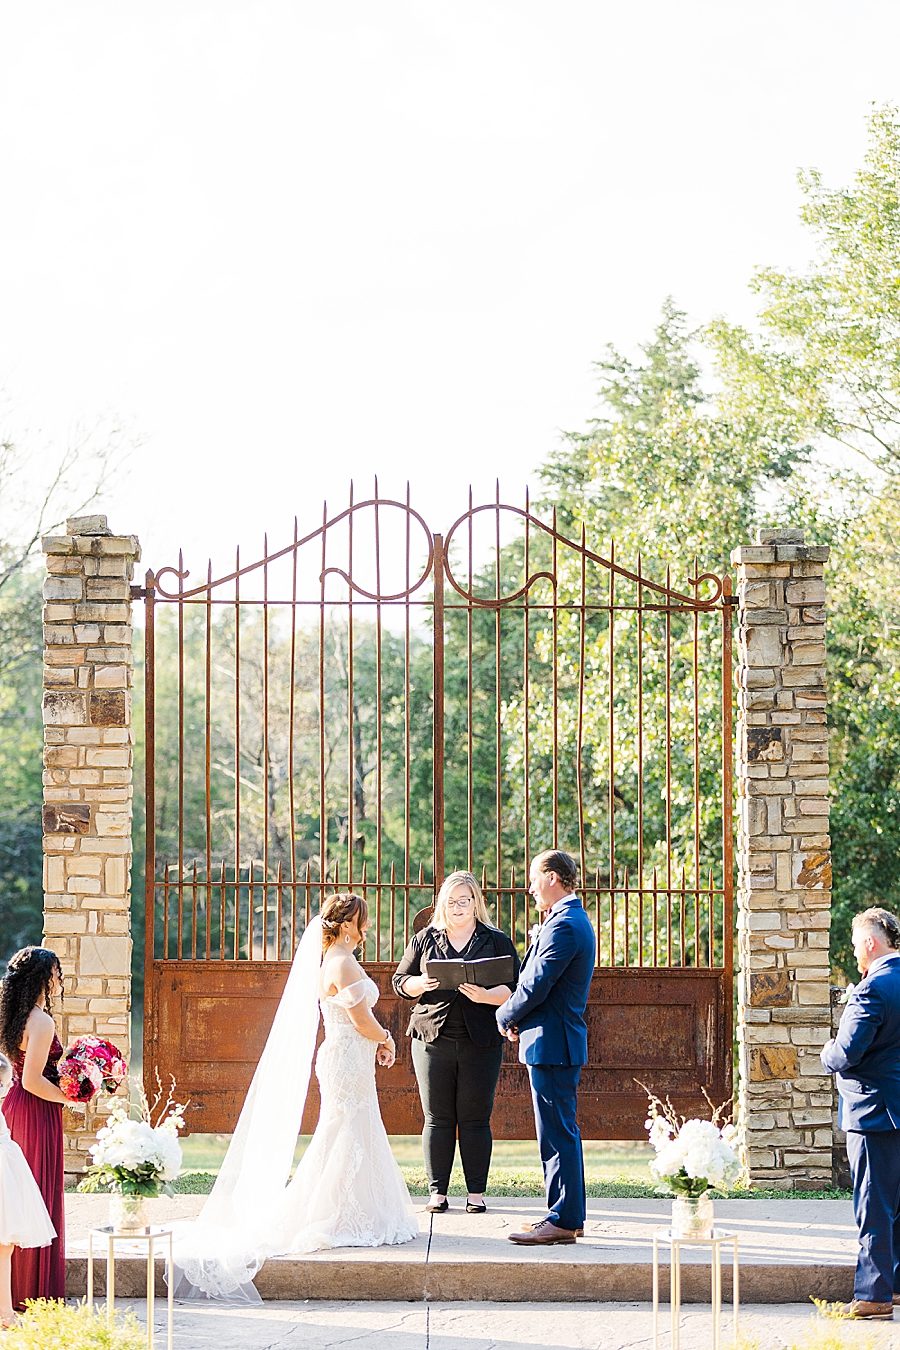 exchanging vows at this stone gate farm wedding